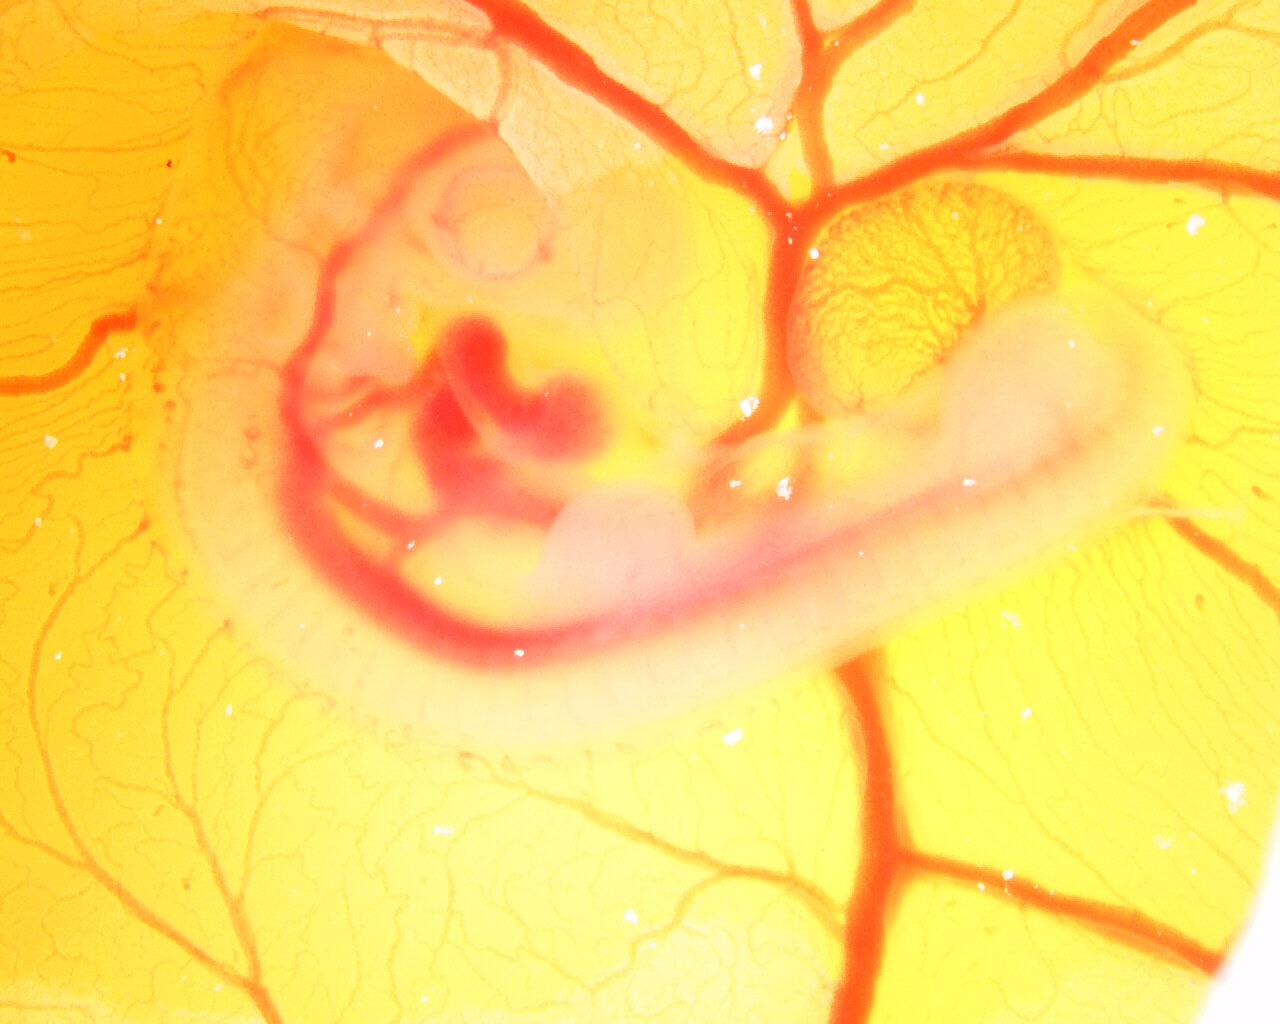  Image of a chicken embryo as prepared by a student 